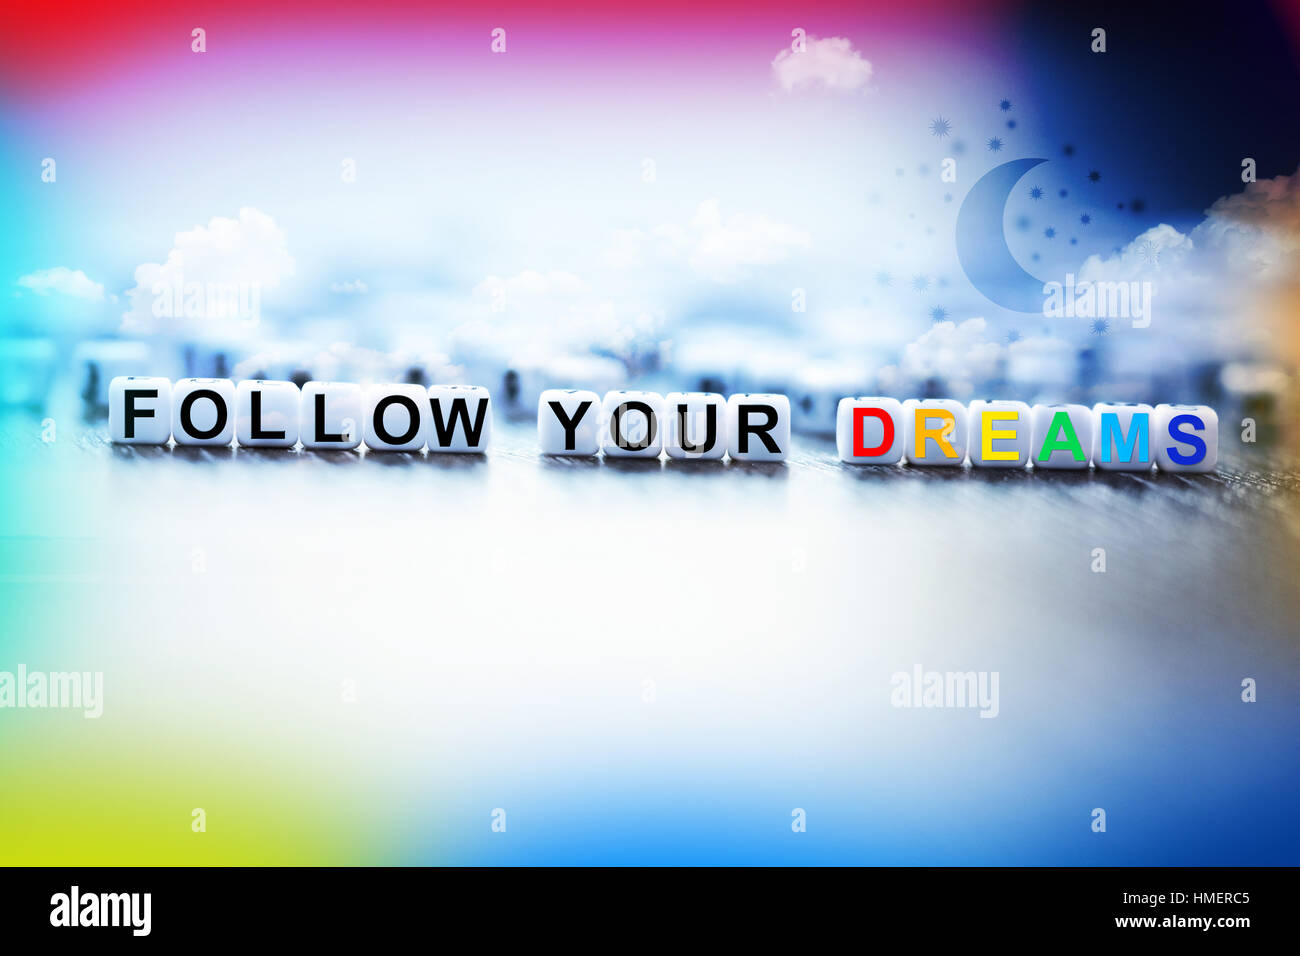 Follow your dreams text made from plastic letter cubes Stock Photo